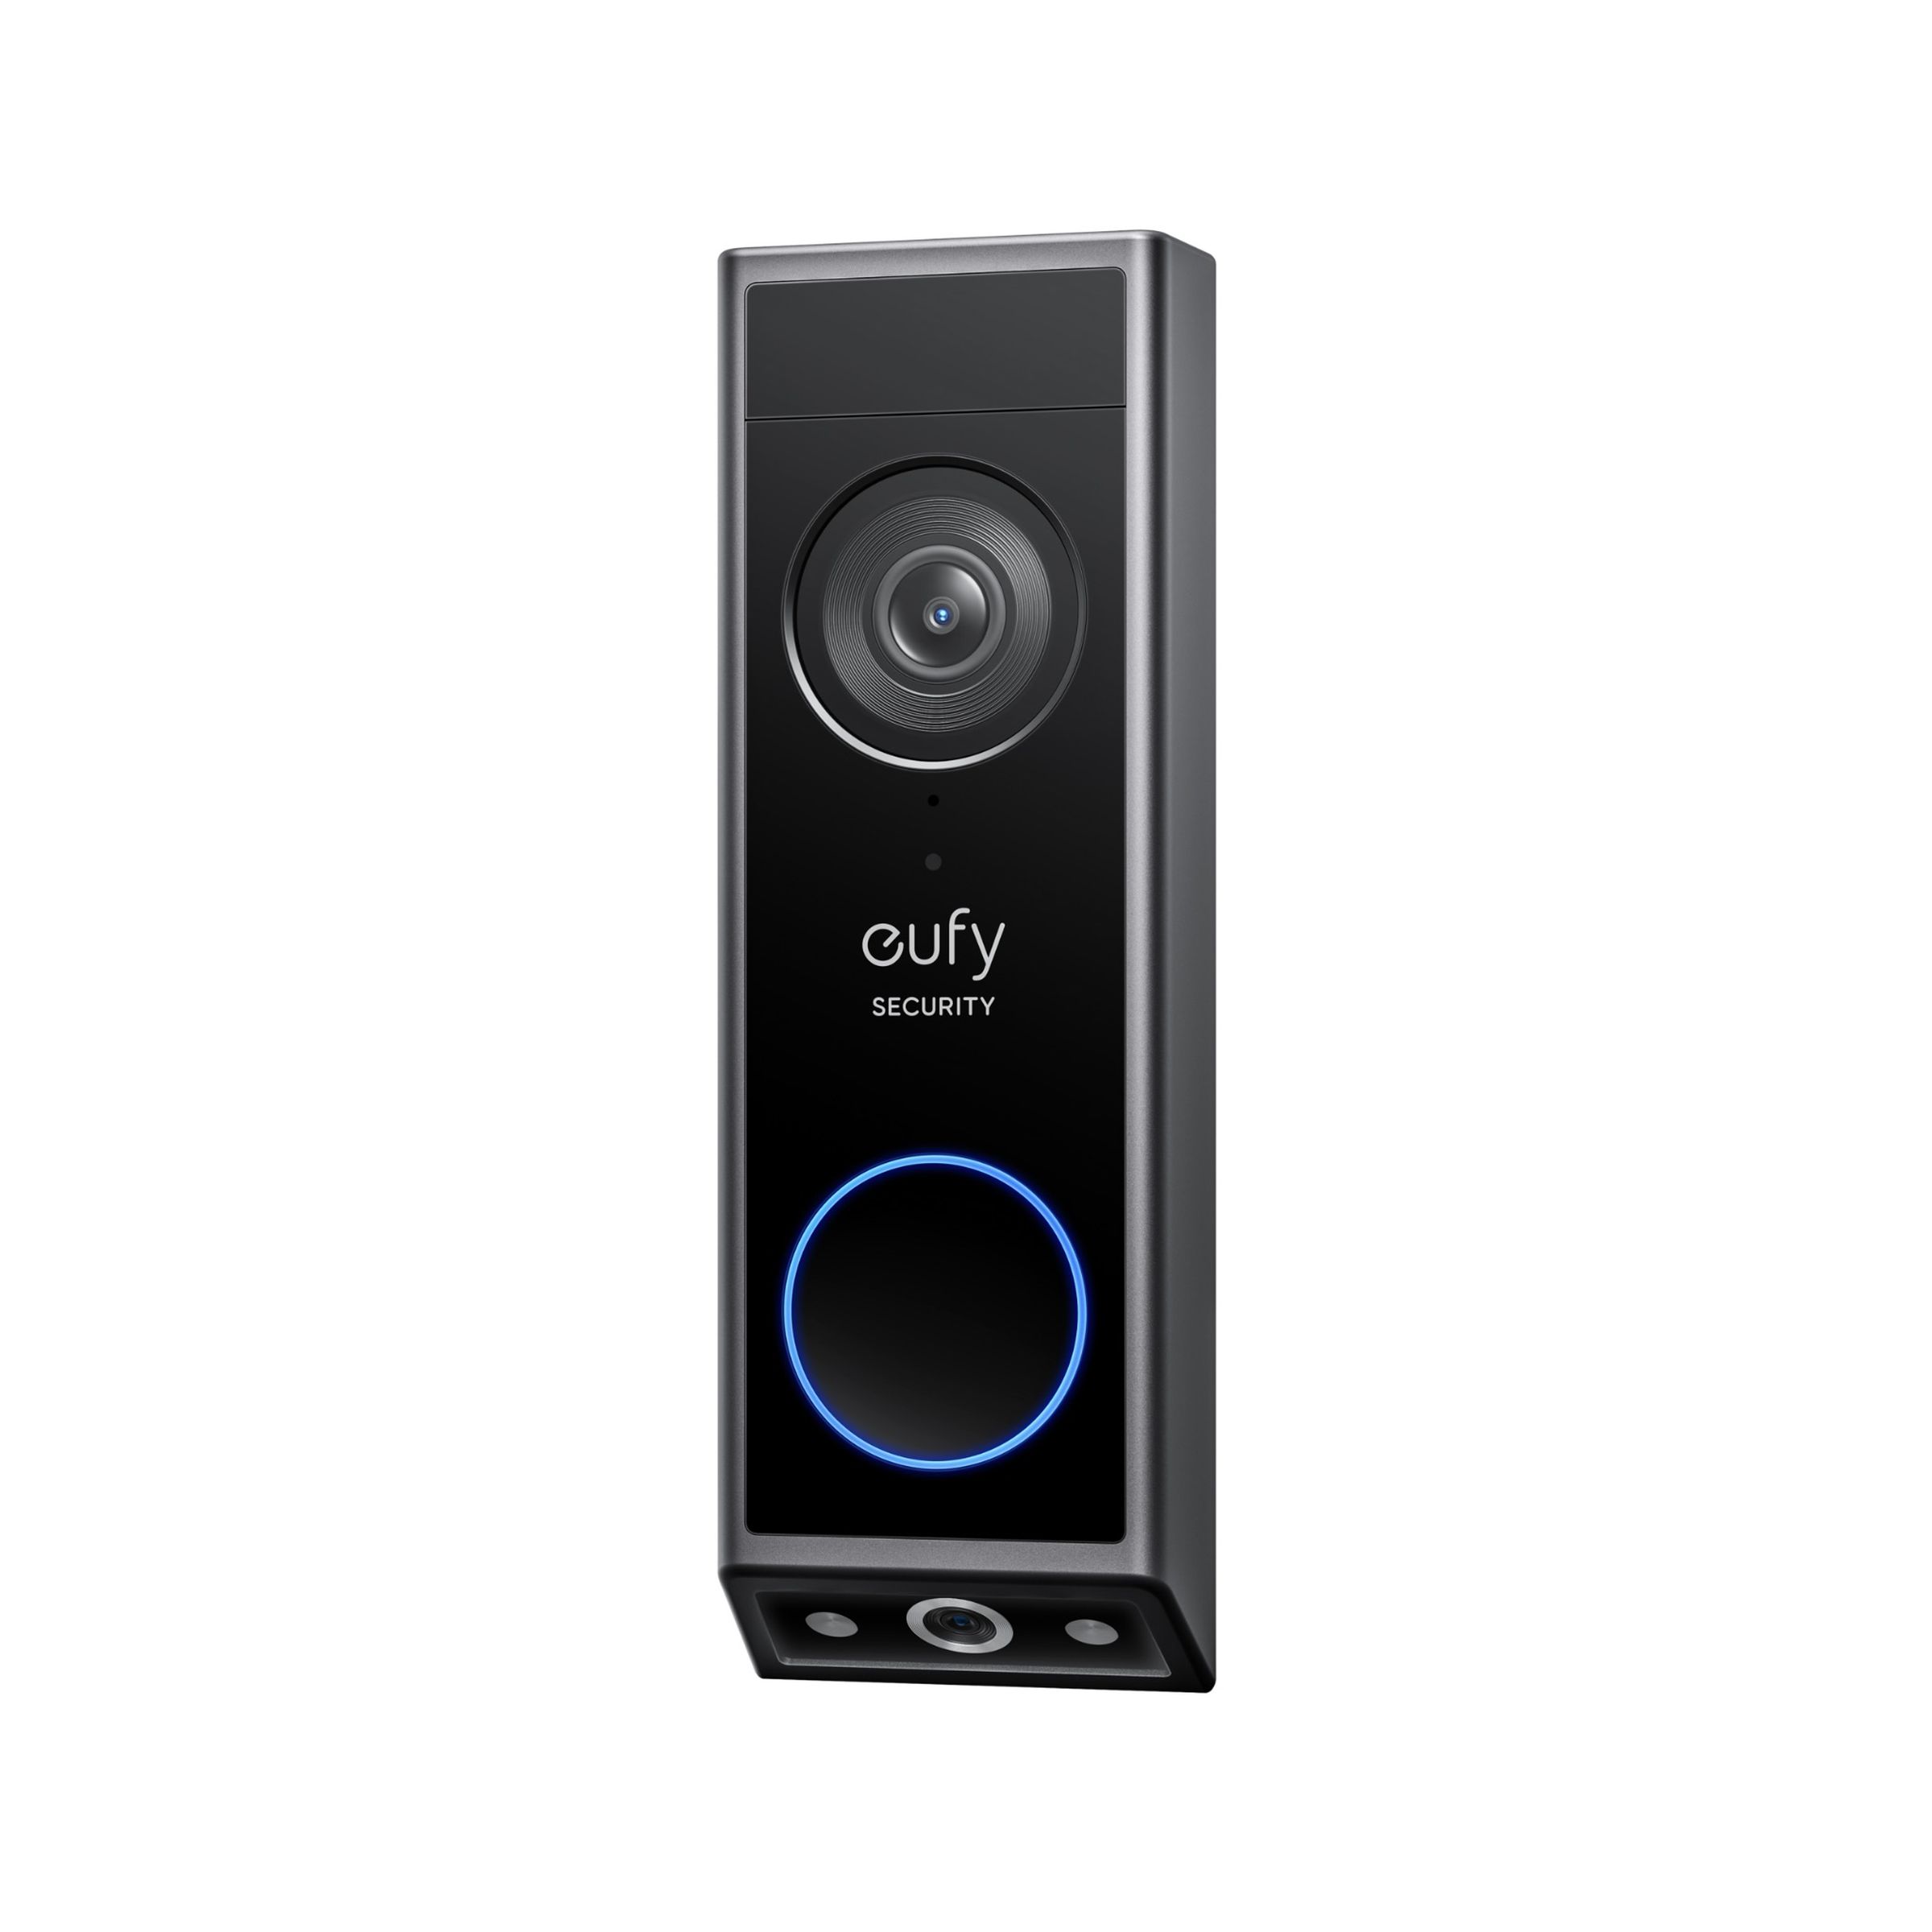 The Video Doorbell E340 looks at the ground so you can see packages / block surprise uppercuts.